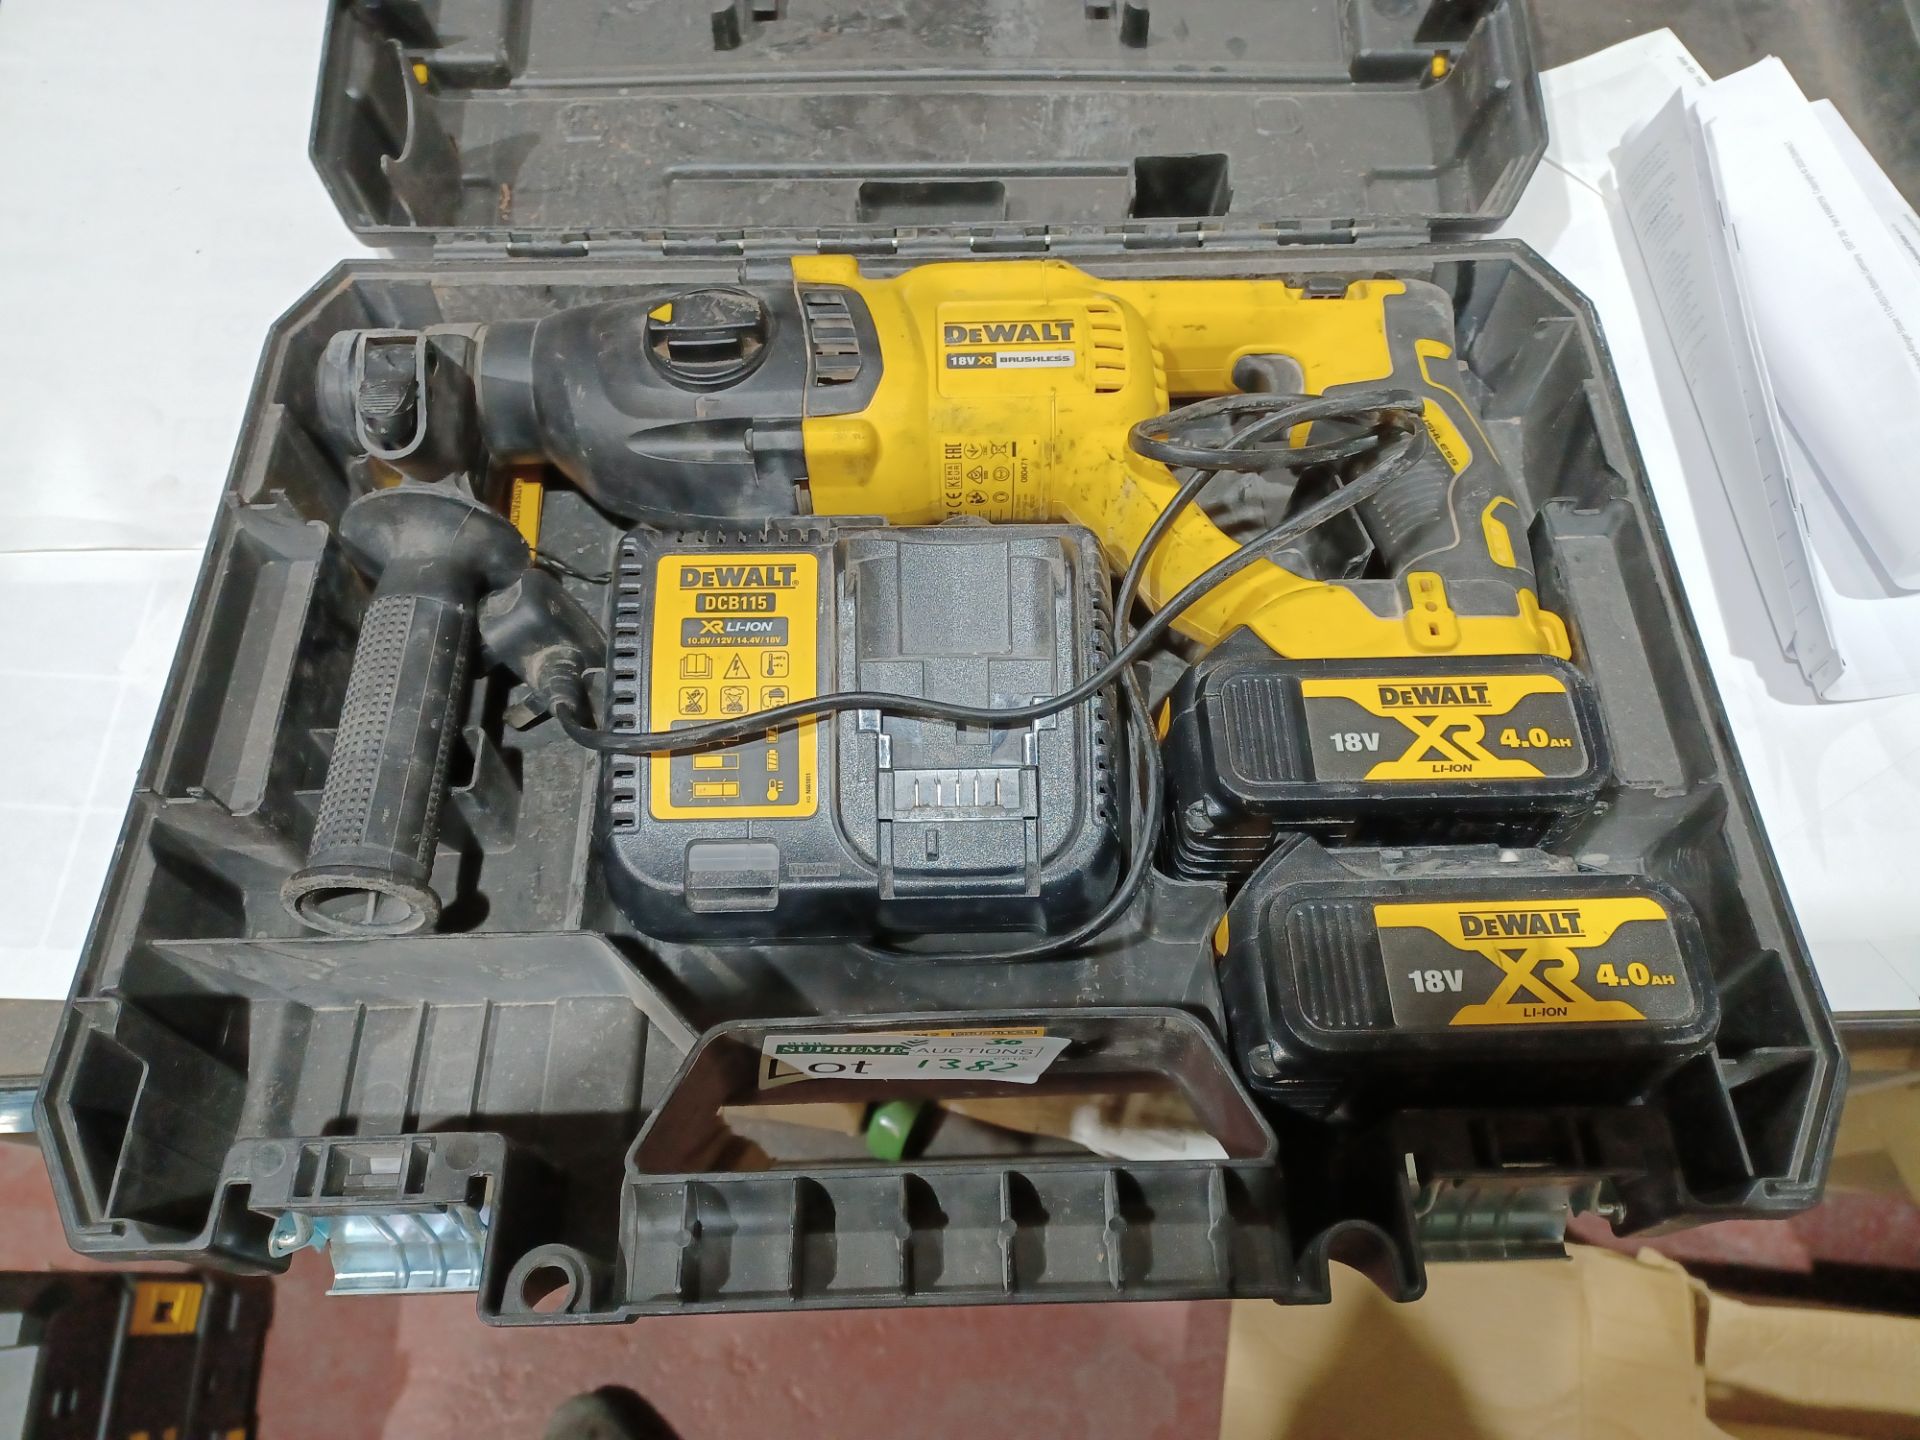 DEWALT DCH033 3KG 18V 4.0AH LI-ION XR BRUSHLESS CORDLESS SDS PLUS DRILL WITH 2 BATTERIES CHARGER AND